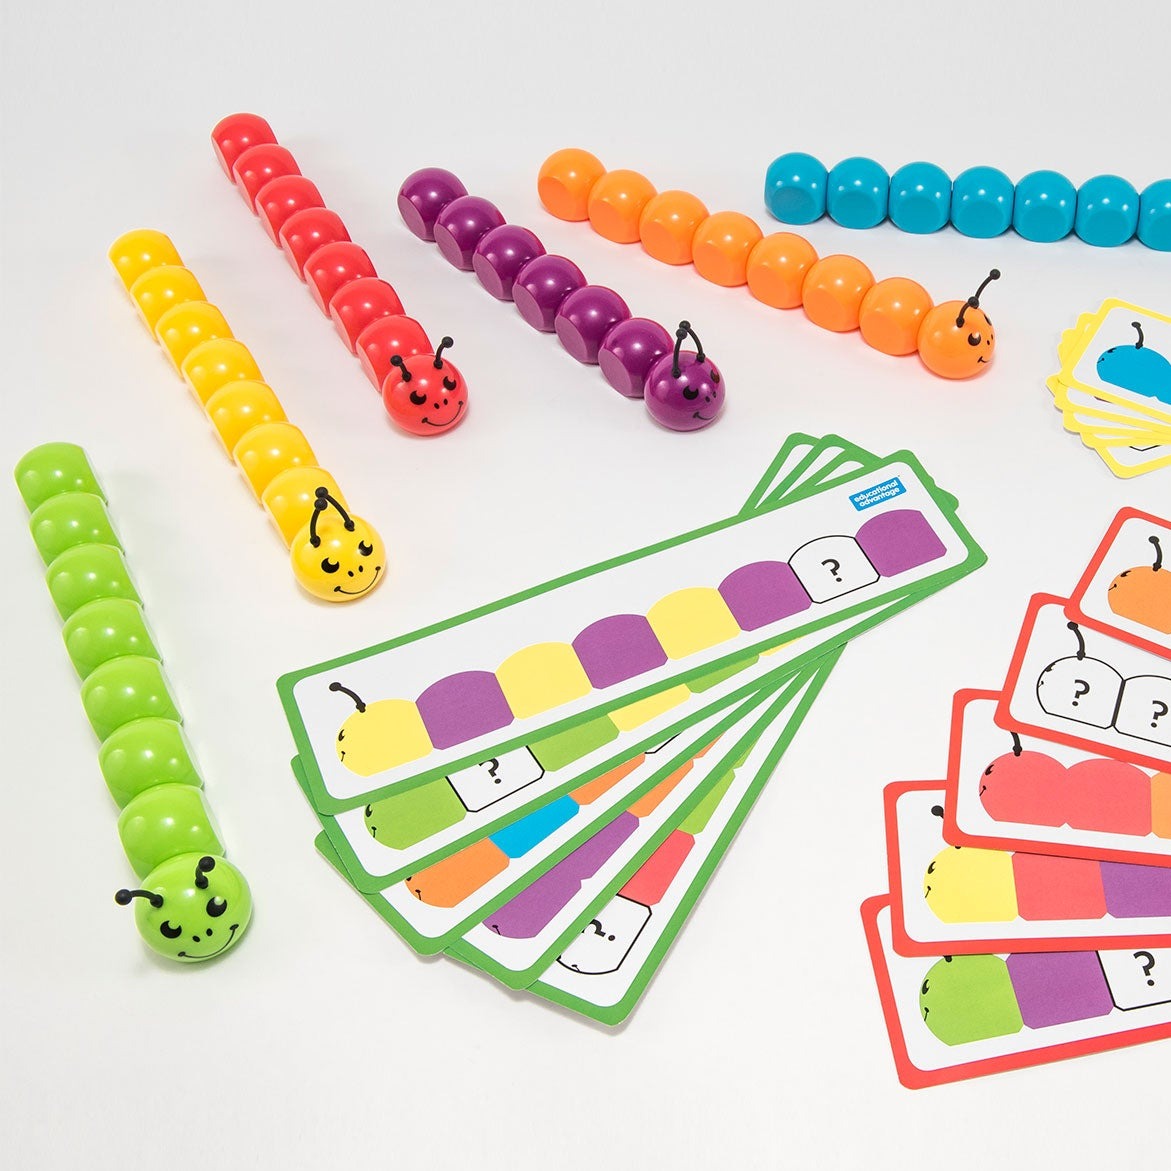 Magnetic Colour Sequencing Bugs, The Magnetic Colour Sequencing Bugs are an educational toy that helps children develop their pattern recognition and sequencing skills in a fun and engaging way. This product includes a set of magnetic bug heads and body segments that are easy for children to snap together, as well as a set of work cards that feature coloured sequences at varying levels of difficulty.The work cards are colour coded across three levels and each card has a sequence consisting of two or three c